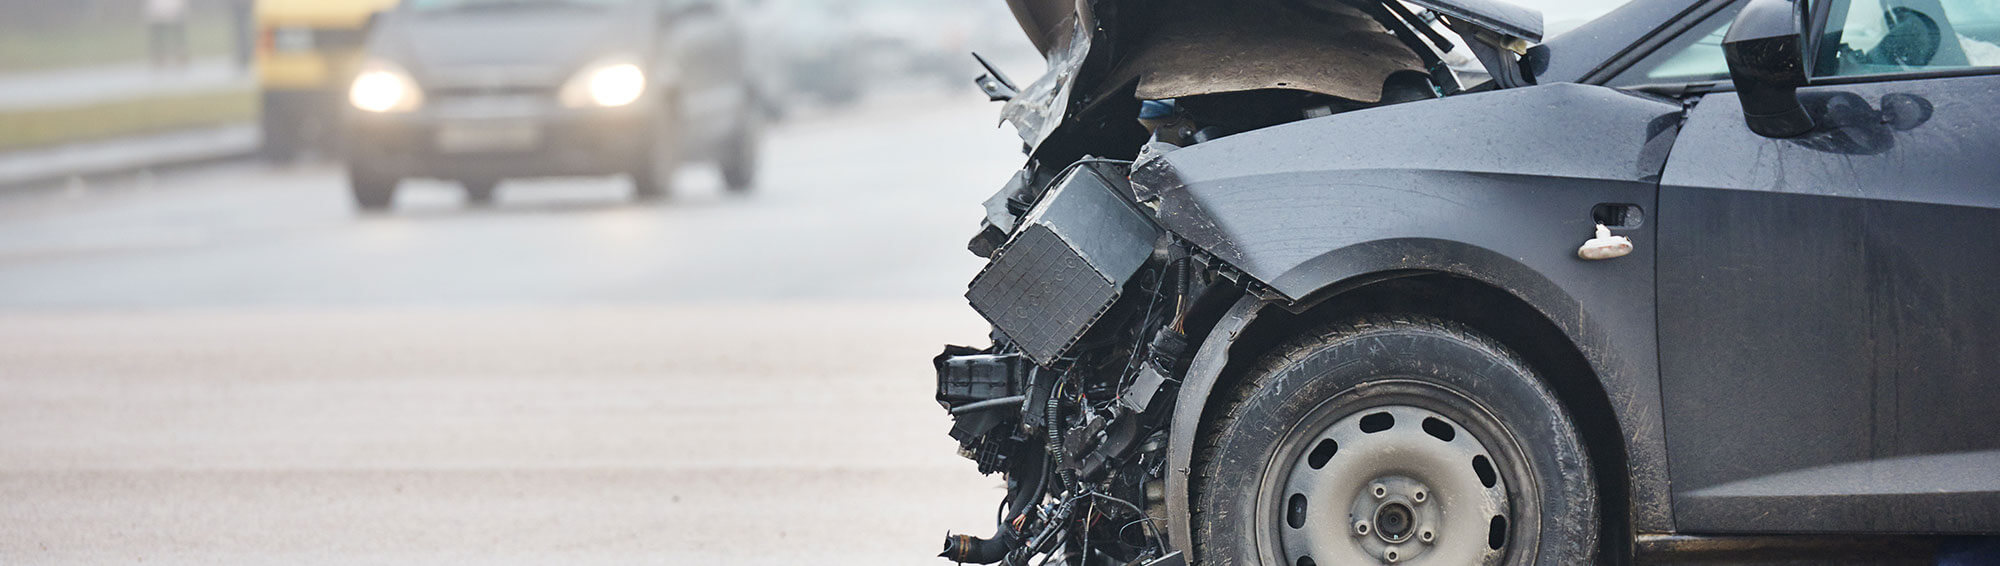 What Happens If You Wait Too Long to File an Auto Accident Claim?